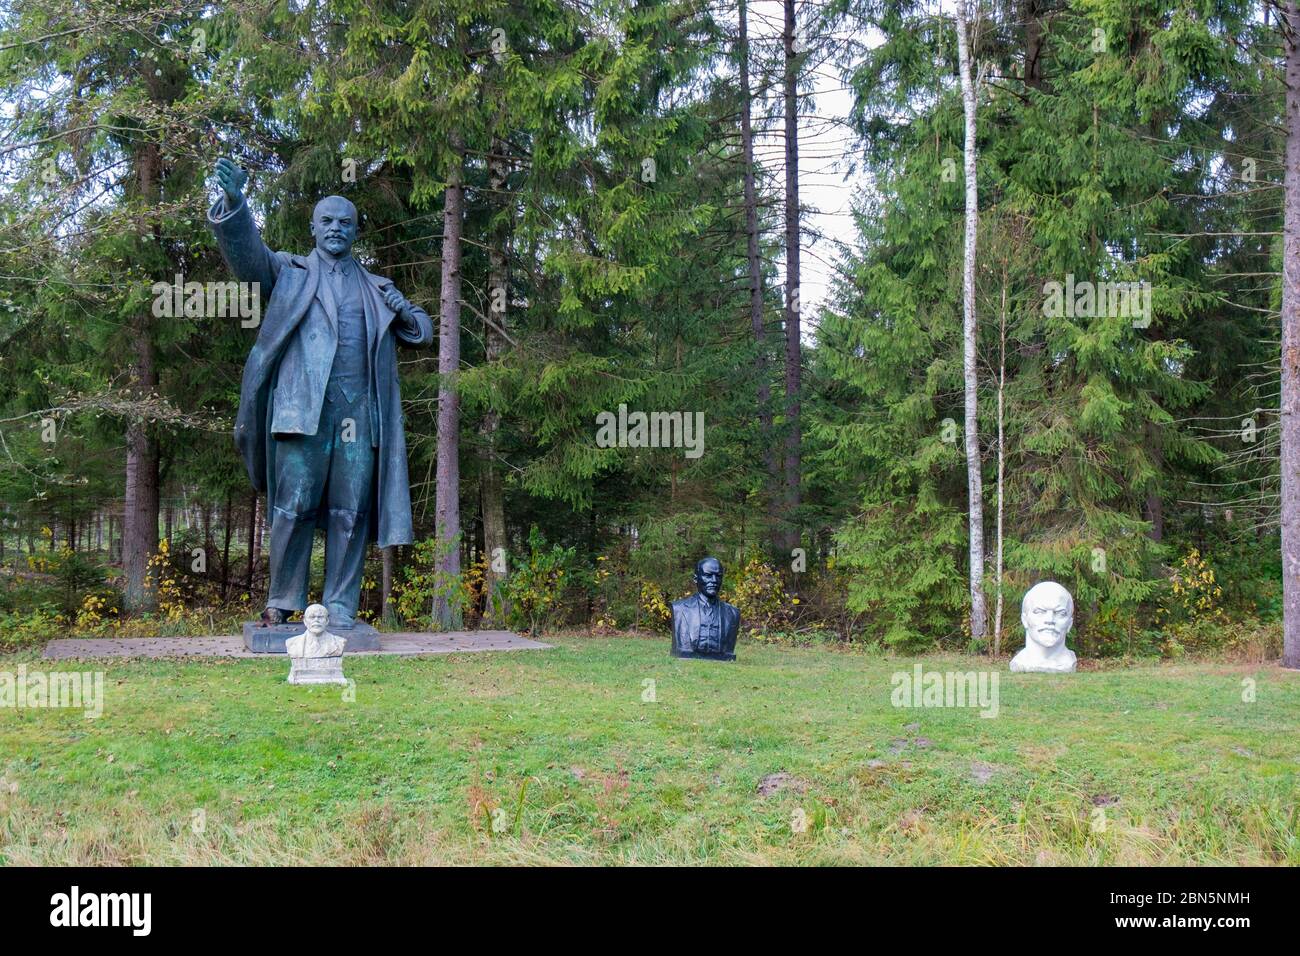 A large, bronze statue of Lenin with smaller busts of him. At Gruto Parkas near Druskininkai, Lithuania. Stock Photo